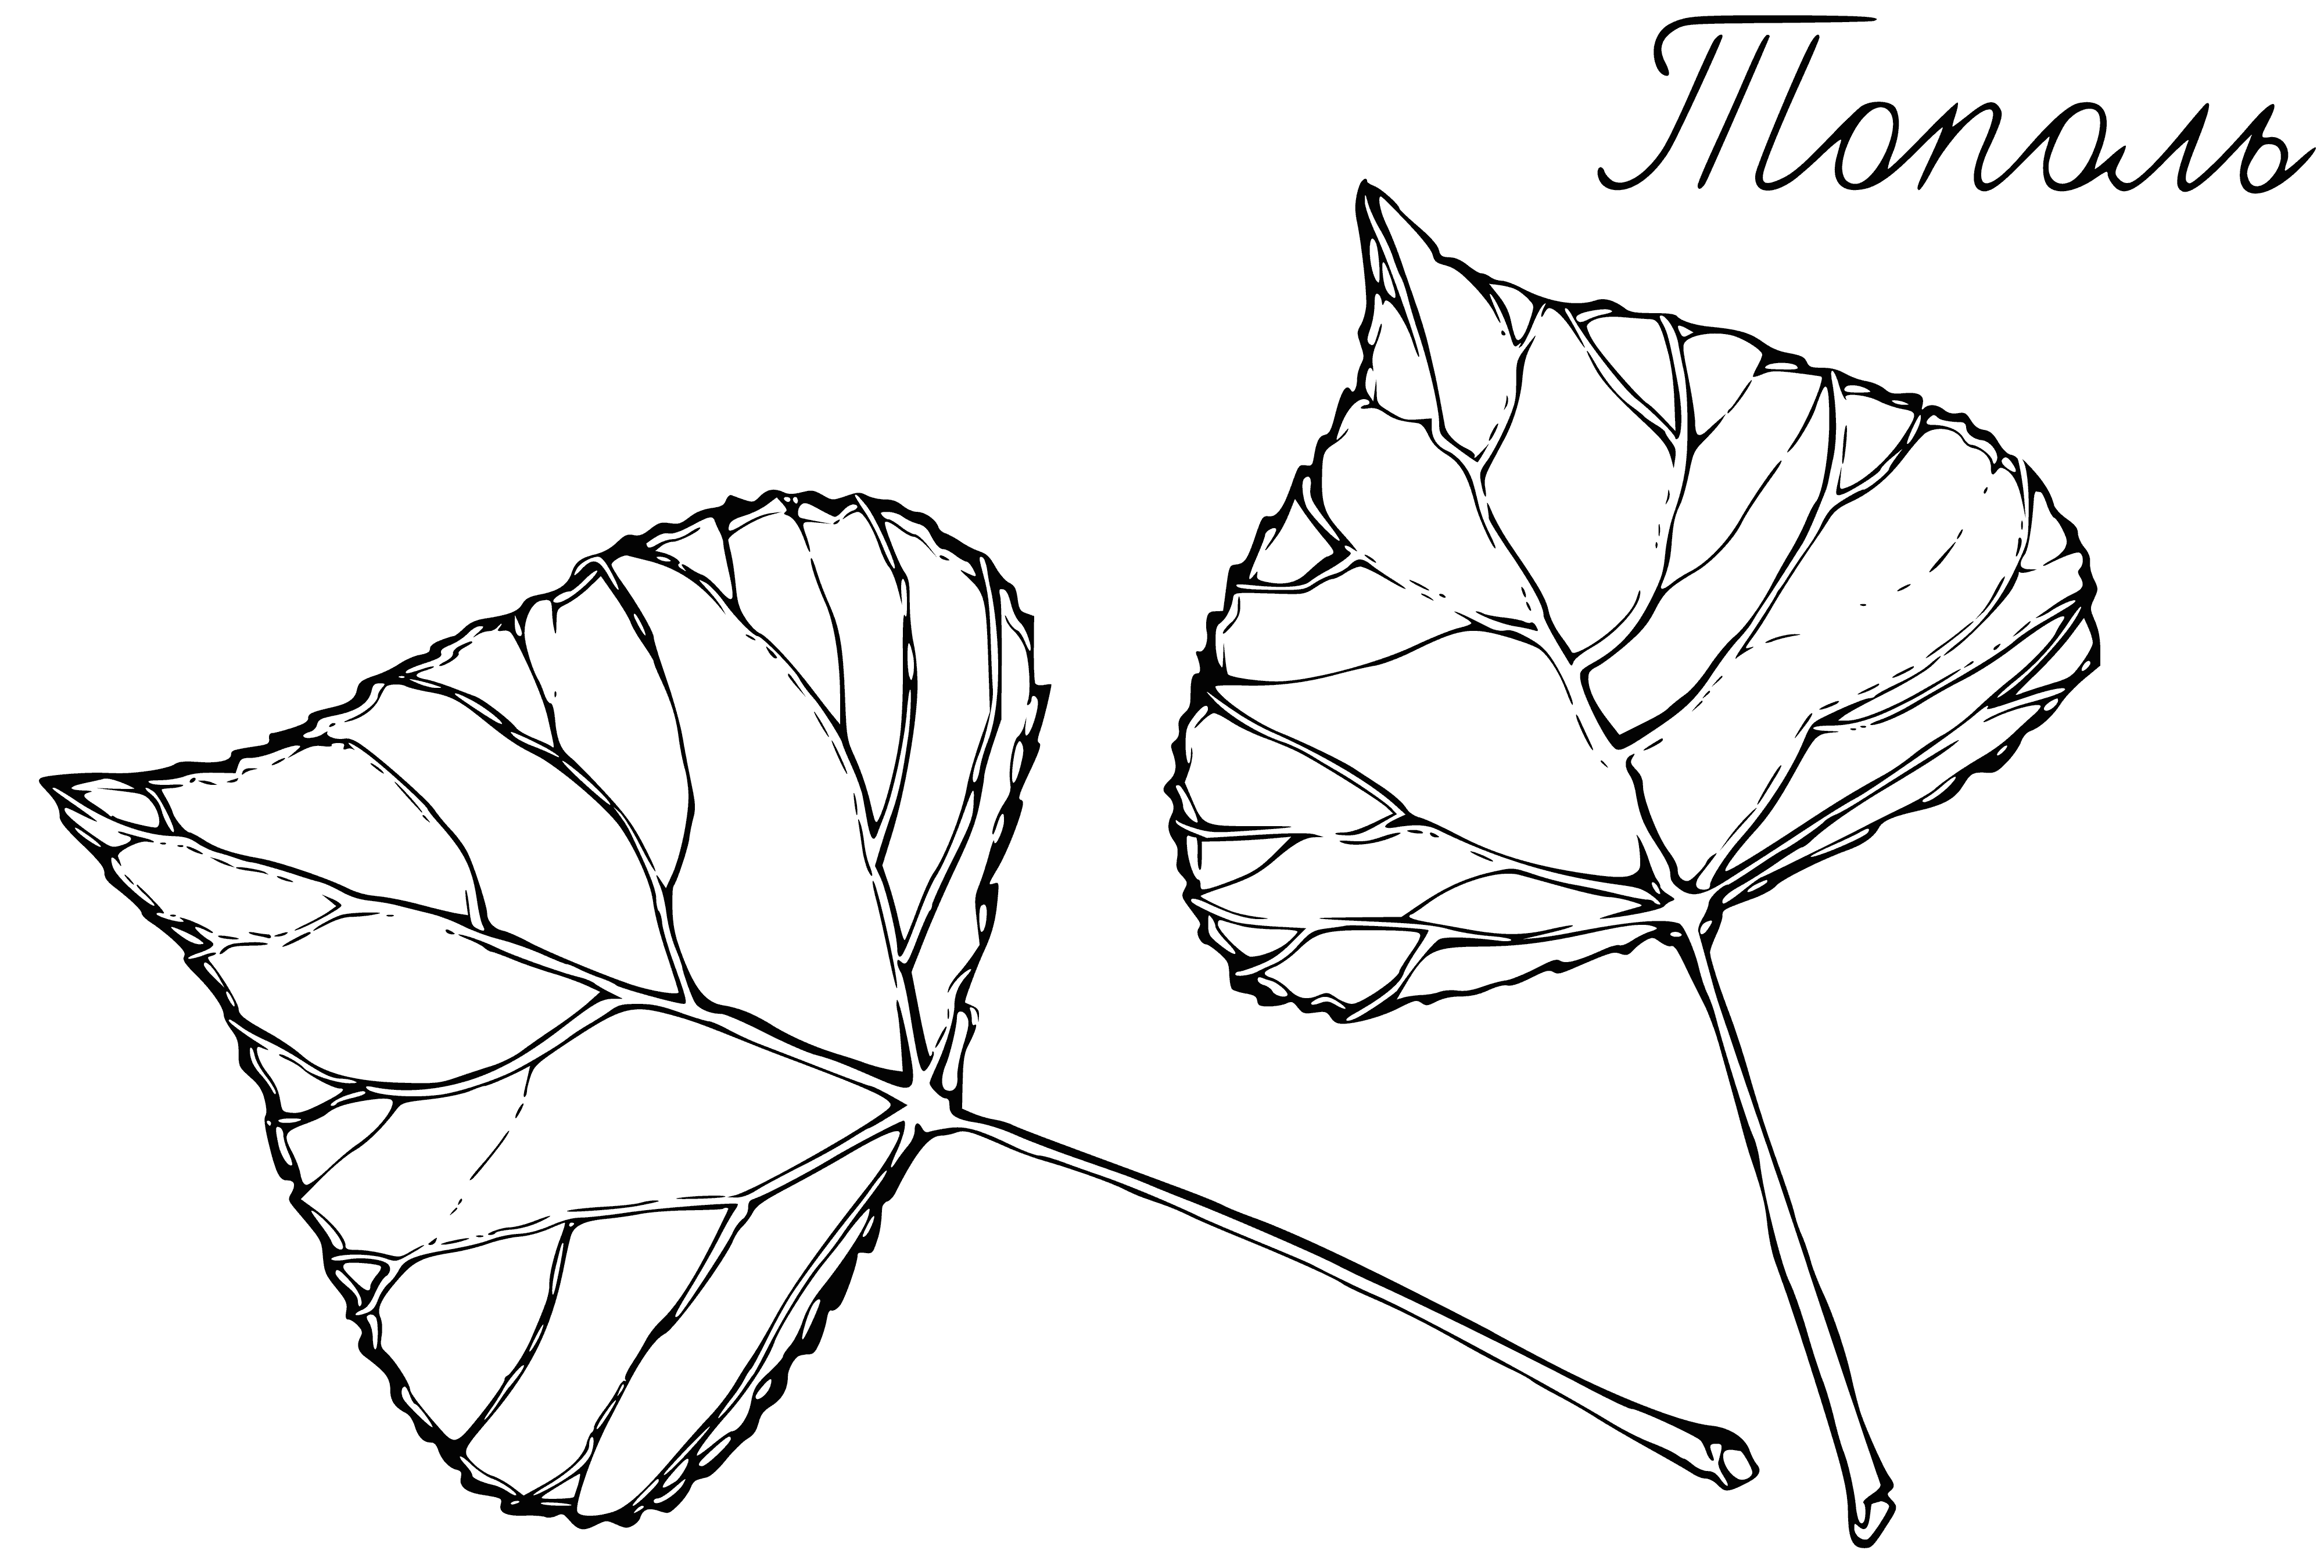 coloring page: Large, triangular leaves; green/white underside, serrated; small, round, green fruits w/ stalk, borne on branches. #botany